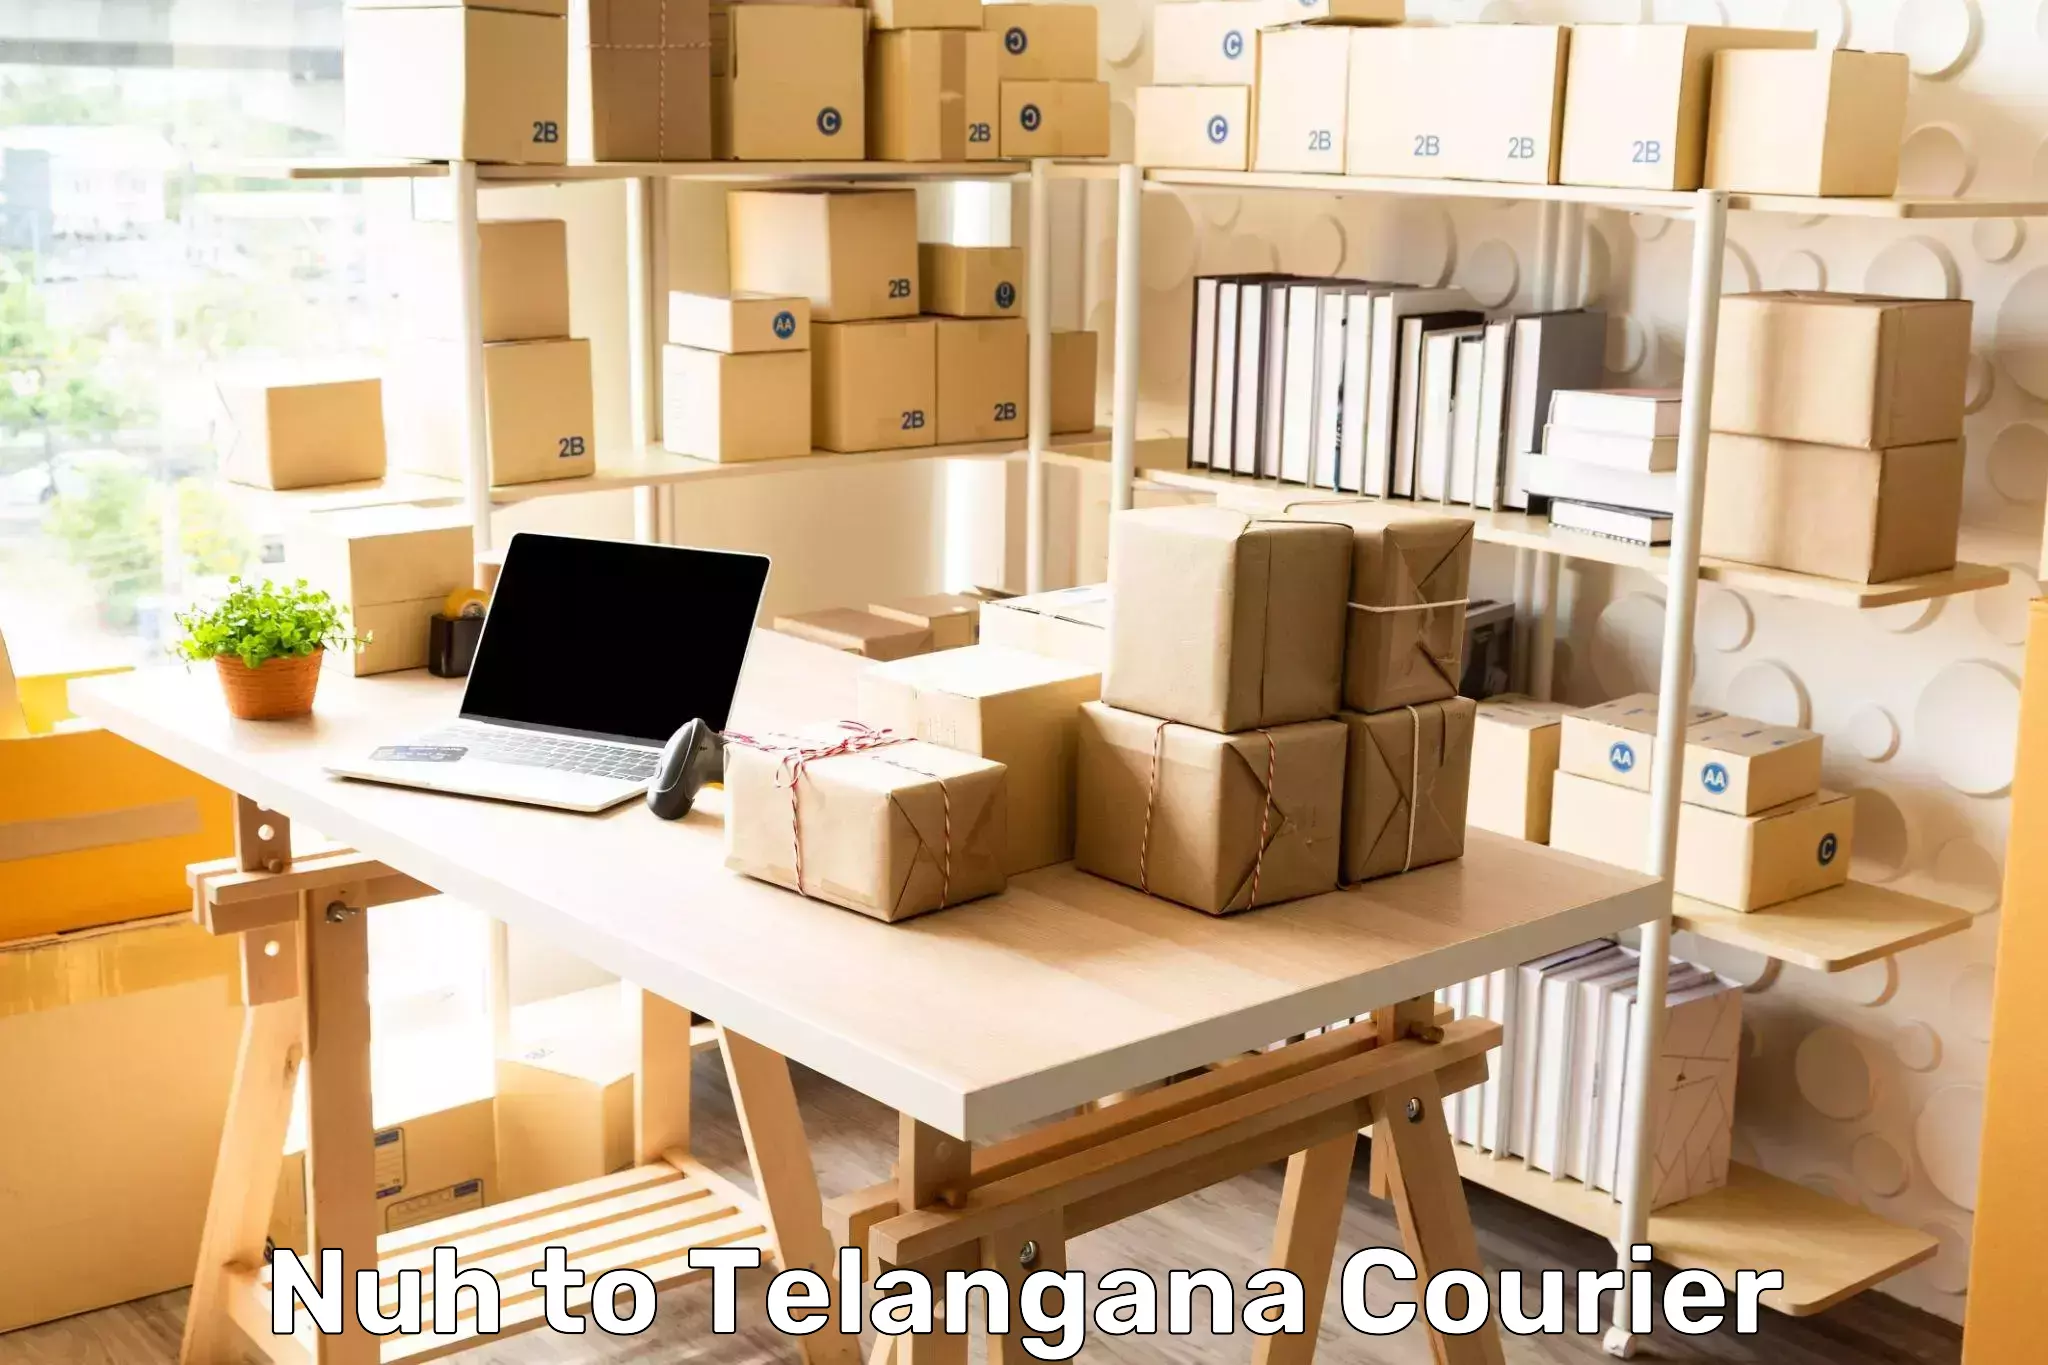 Business delivery service Nuh to Adilabad